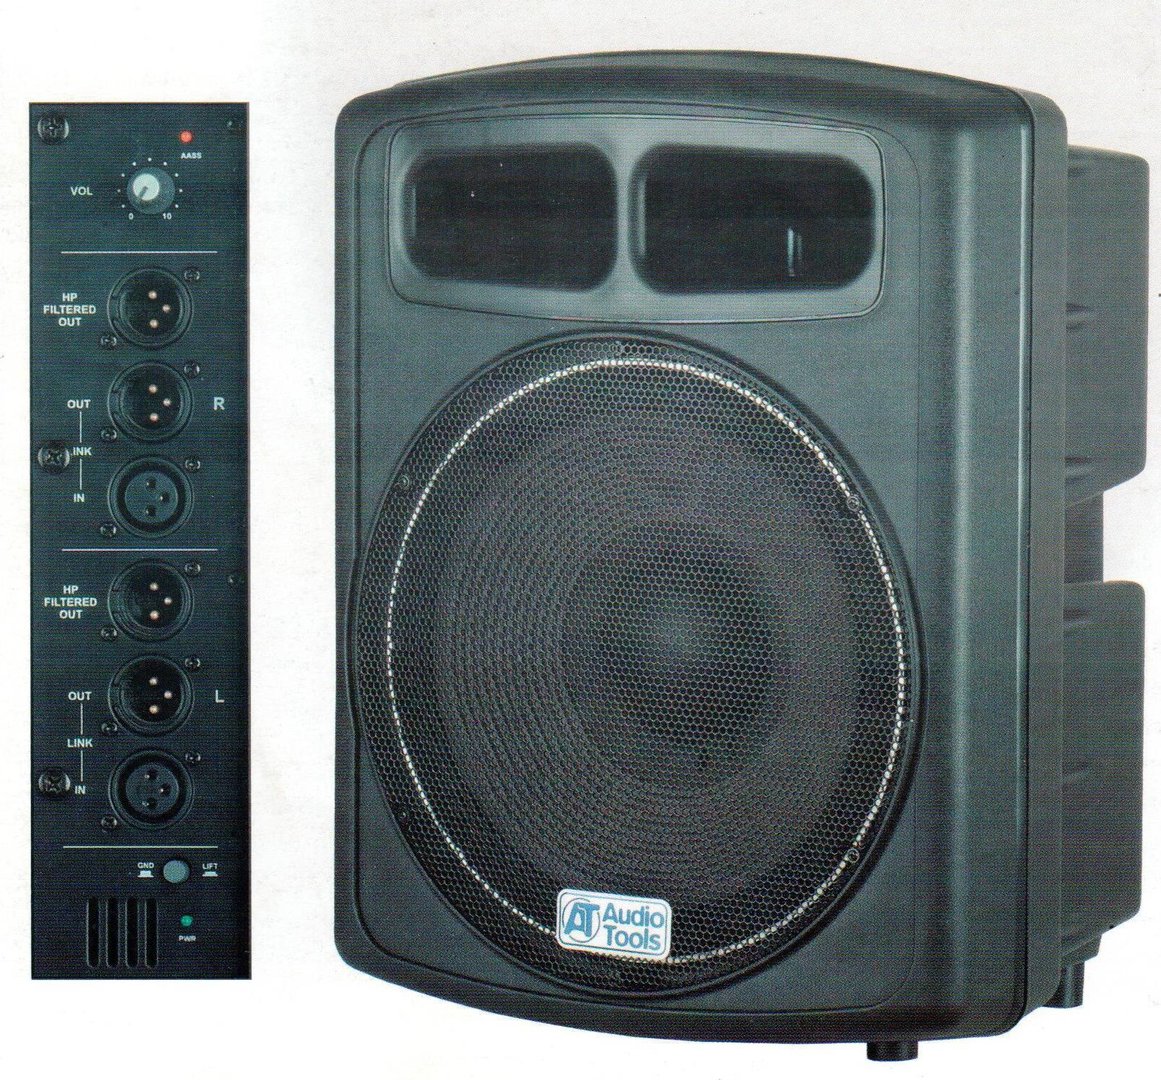 AS151A - AUDIO TOOLS - SUBWOOFER ATTIVO 600W 15"